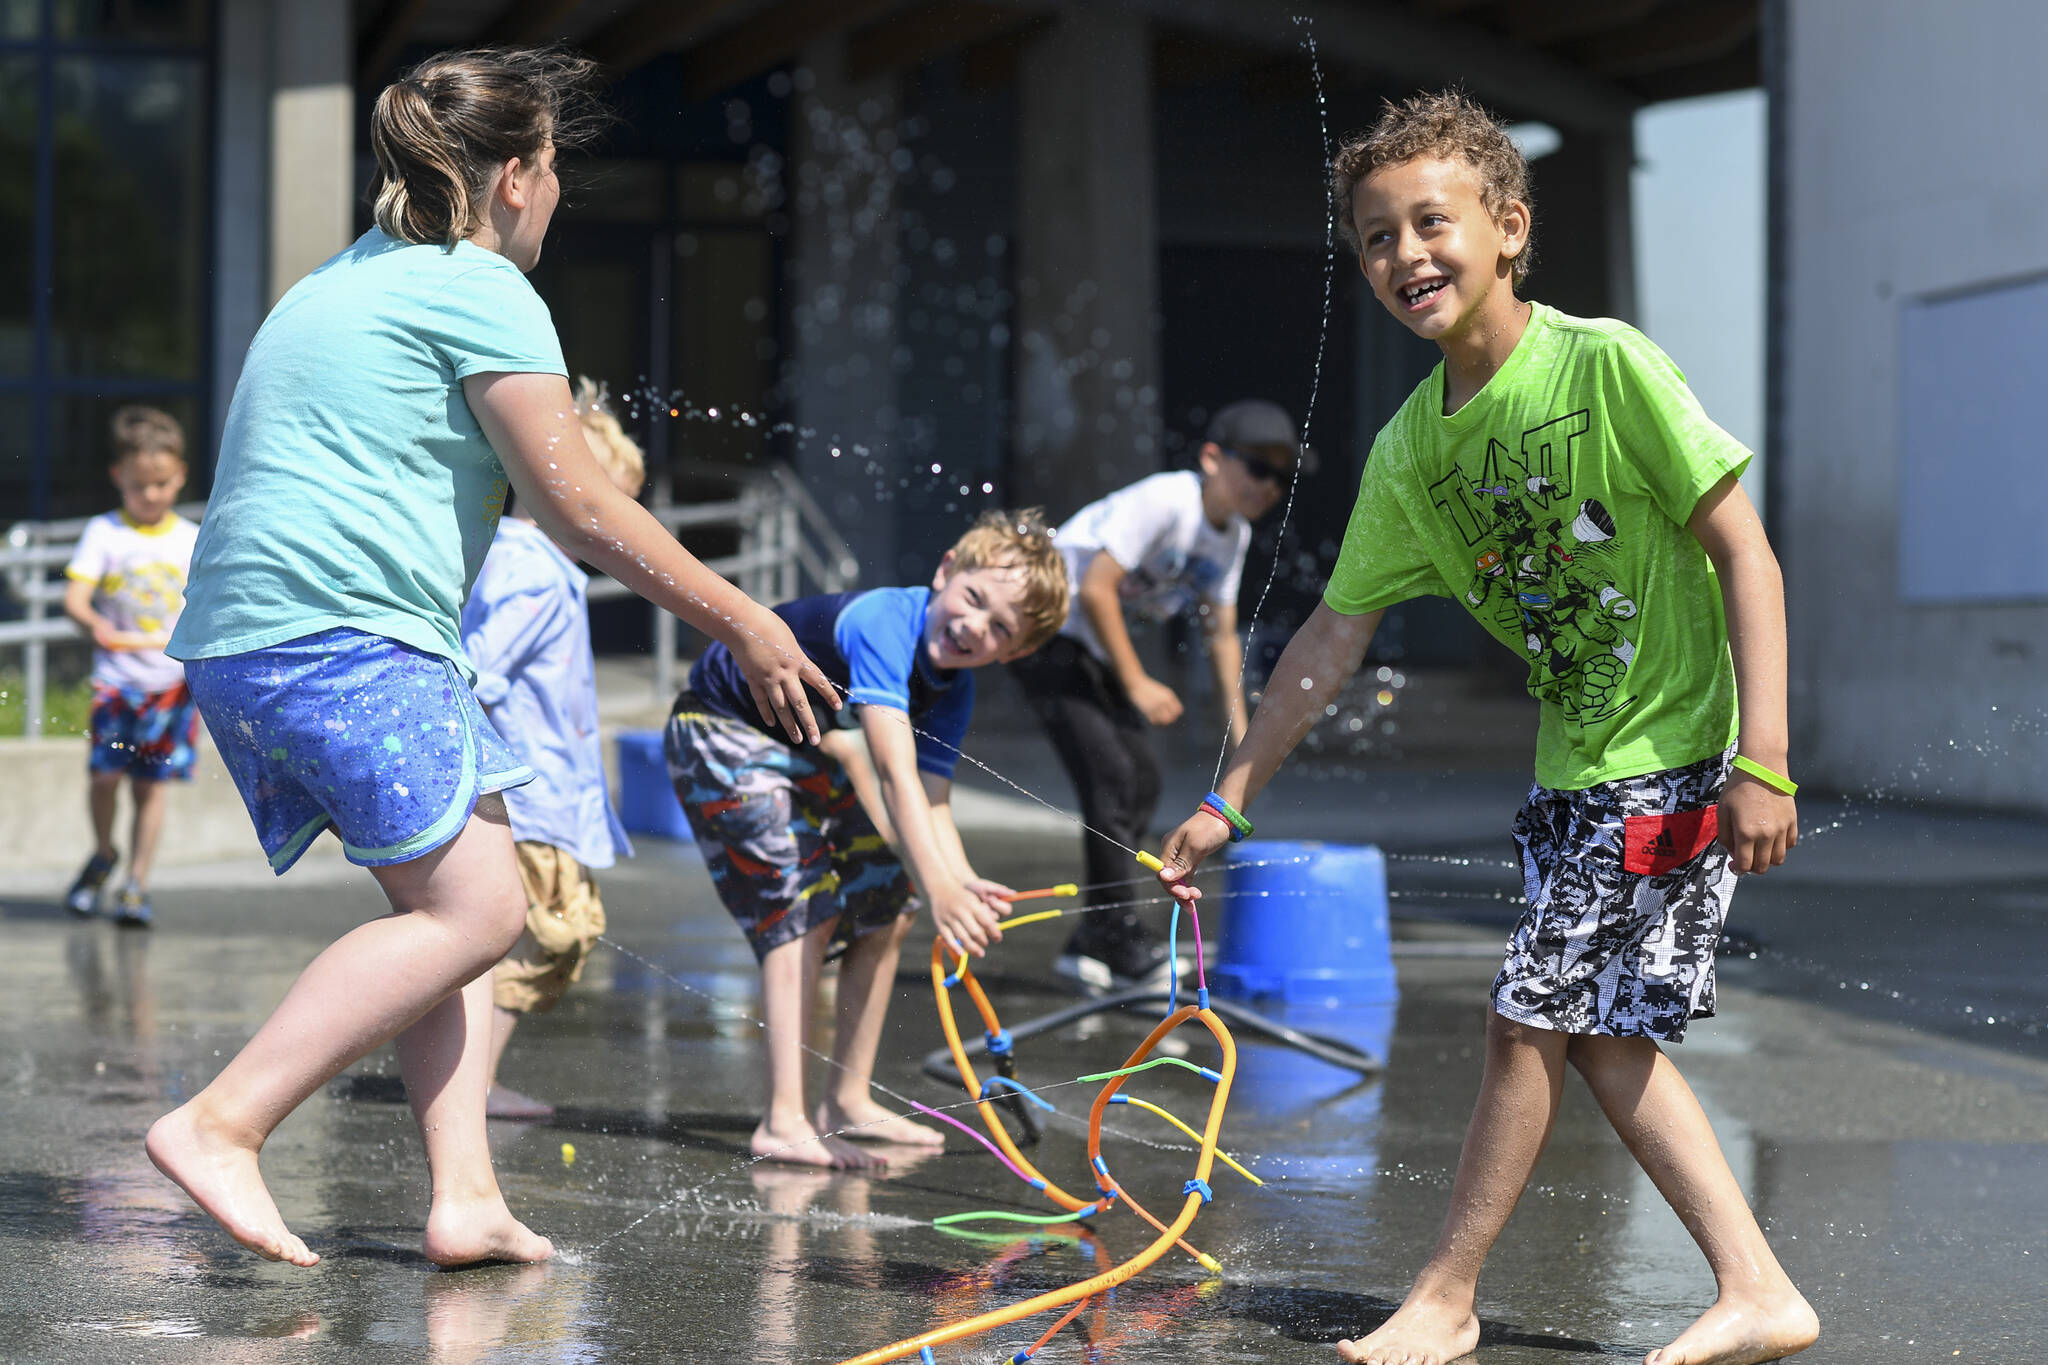 Michael Penn / Juneau Empire File 
David Kimbrough, 7, right, Clayton Haywood, 6, center, and Kyla Belcourt, 8, play in sprinklers set up during the RALLY program at Harborview Elementary School on Wednesday, June 26, 2019. RALLY provides before- and after-school care to families with school-age children and offers care during school breaks. Recently, some parents have complained that the price of the program is too high. Meanwhile, school officials say RALLY routinely loses money and that changes are needed to make it more sustainable.